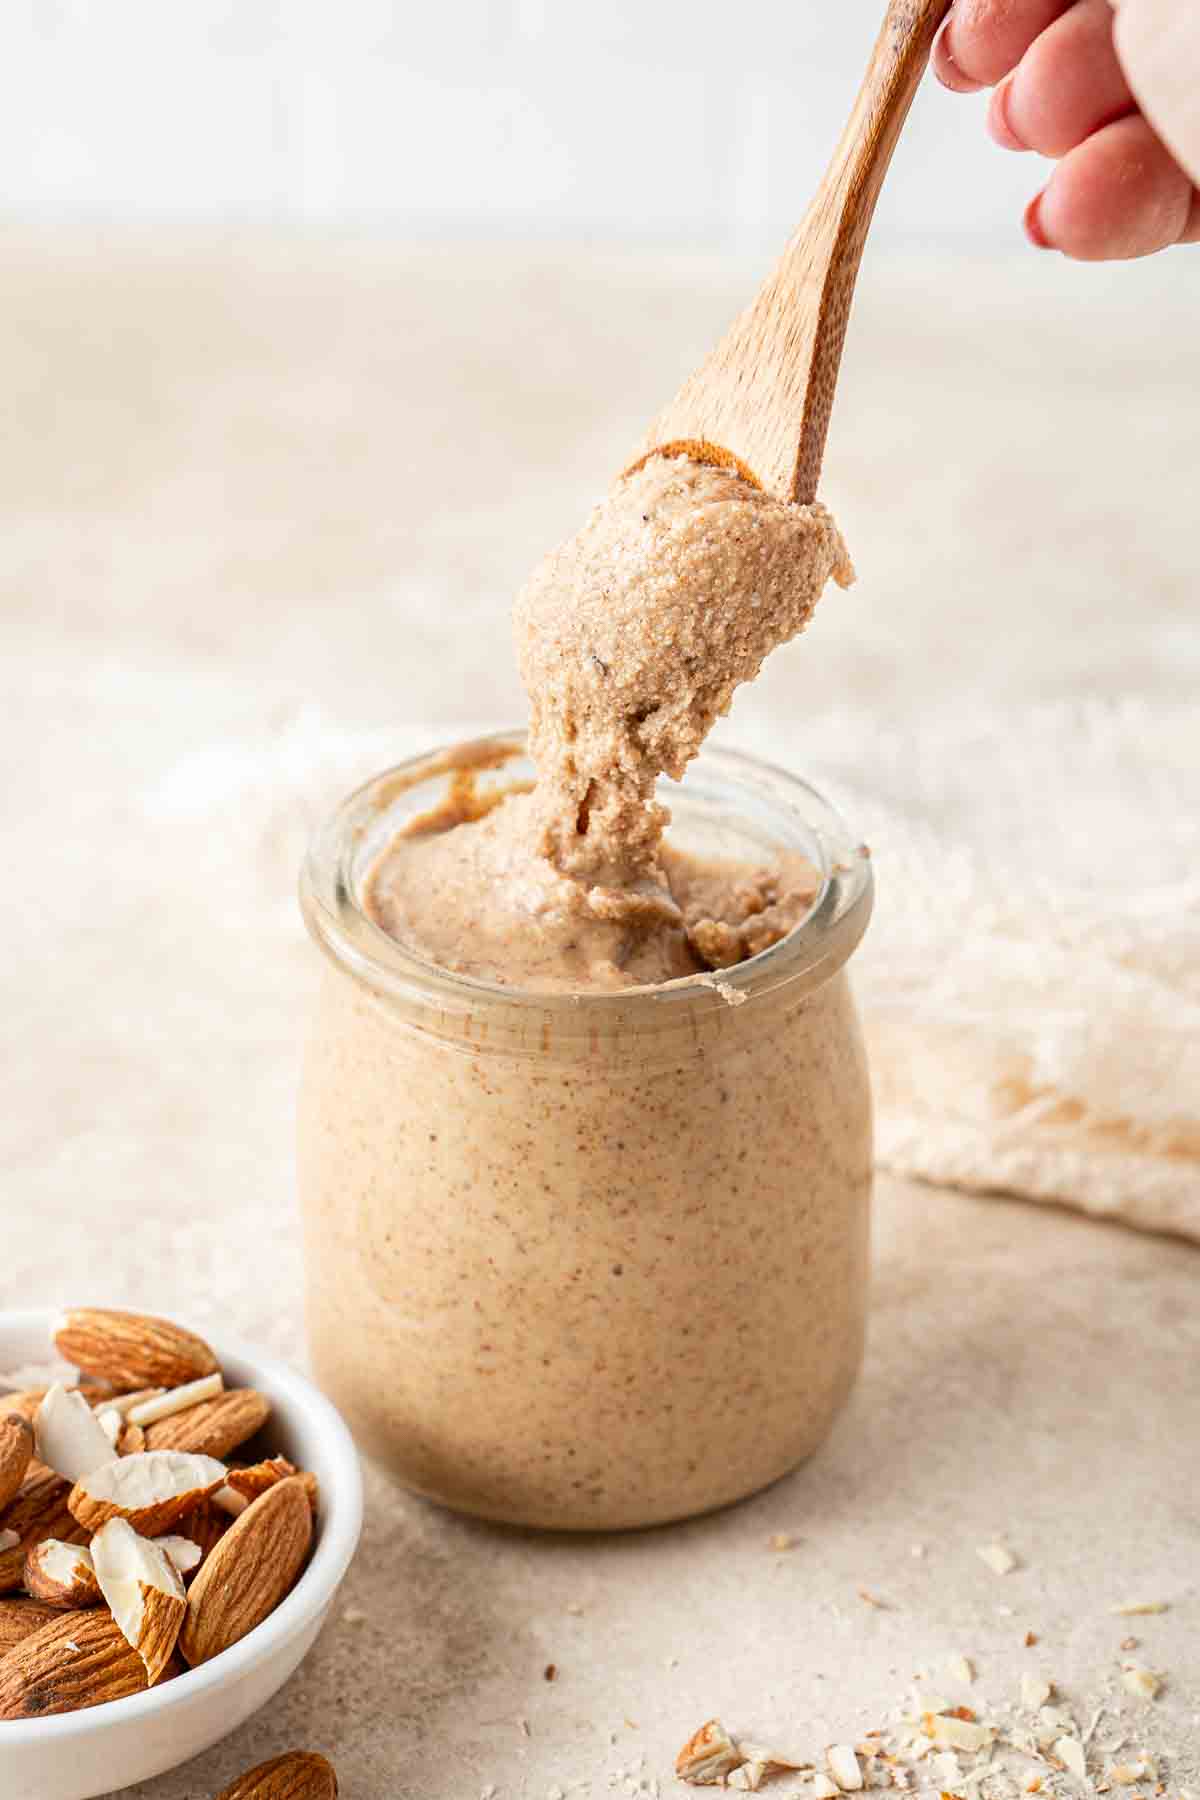 A spoonful of homemade almond butter from a jar.